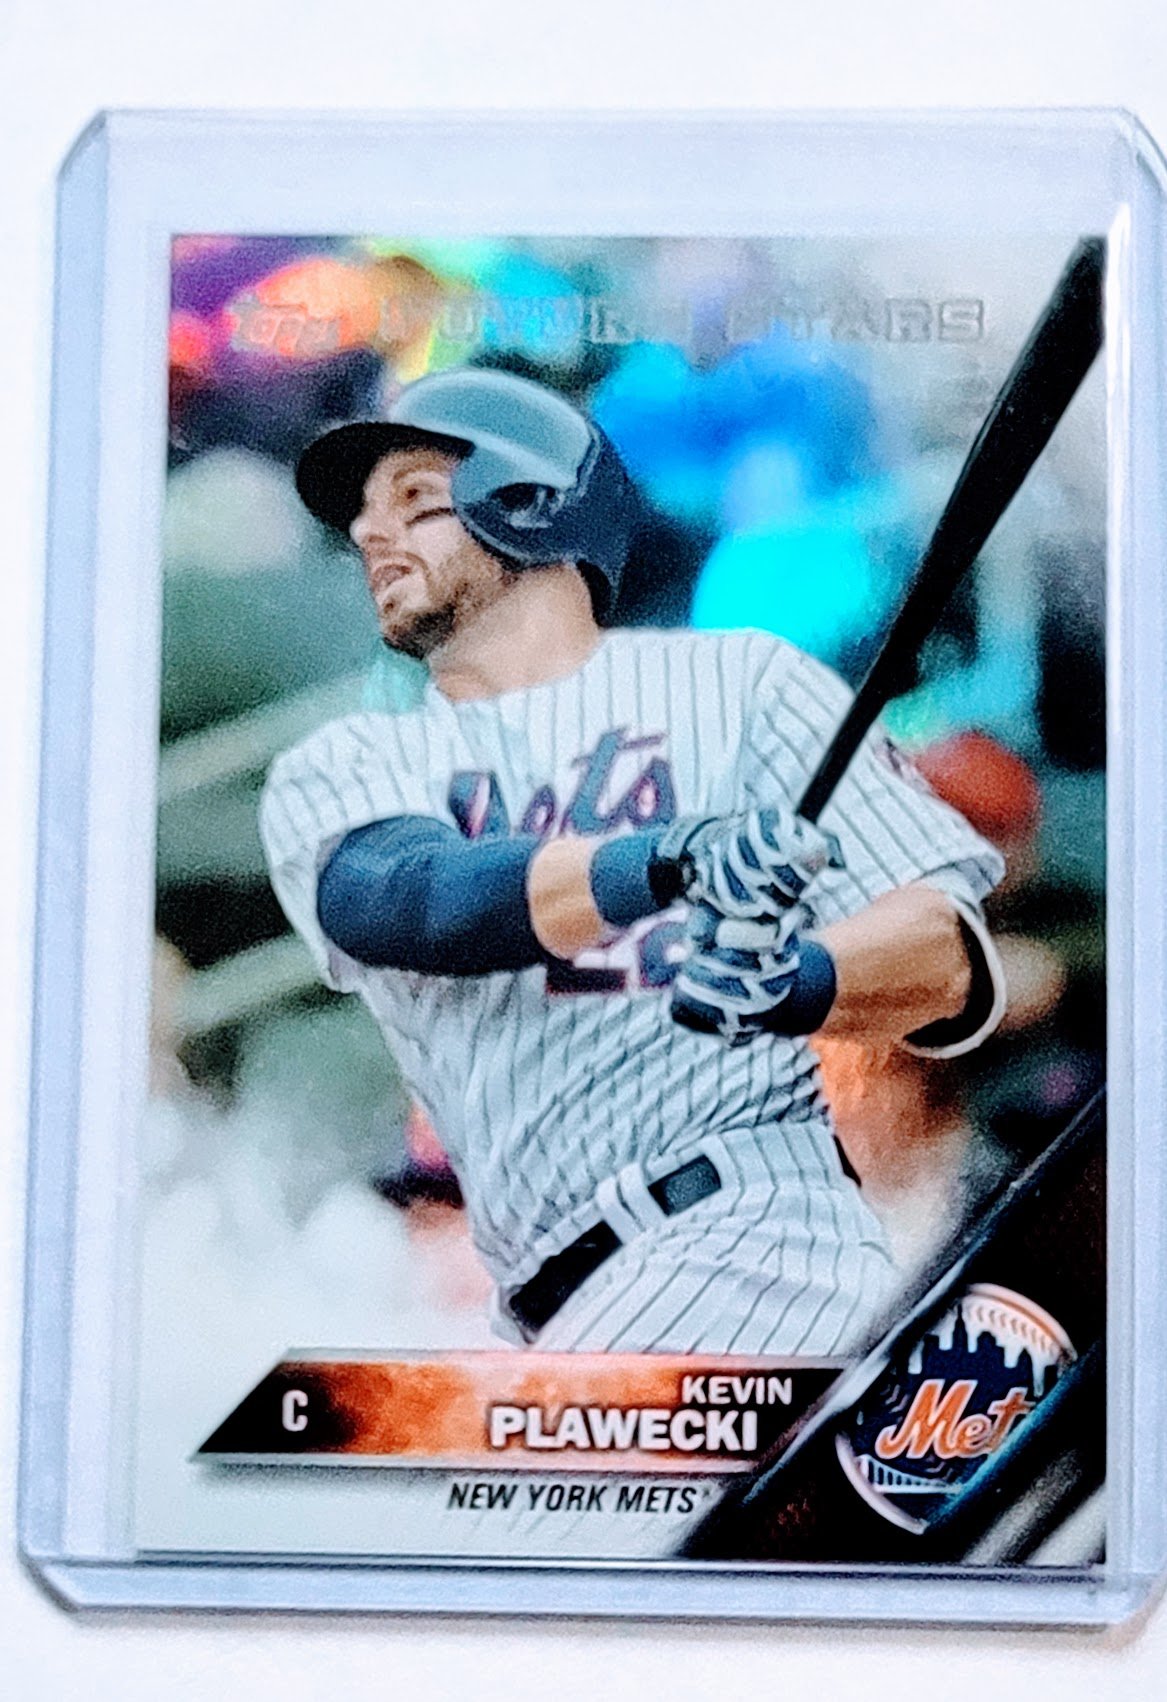 2016 Topps Kevin Plawecki Future Stars Rainbow Foil Refractor Baseball Card TPTV simple Xclusive Collectibles   